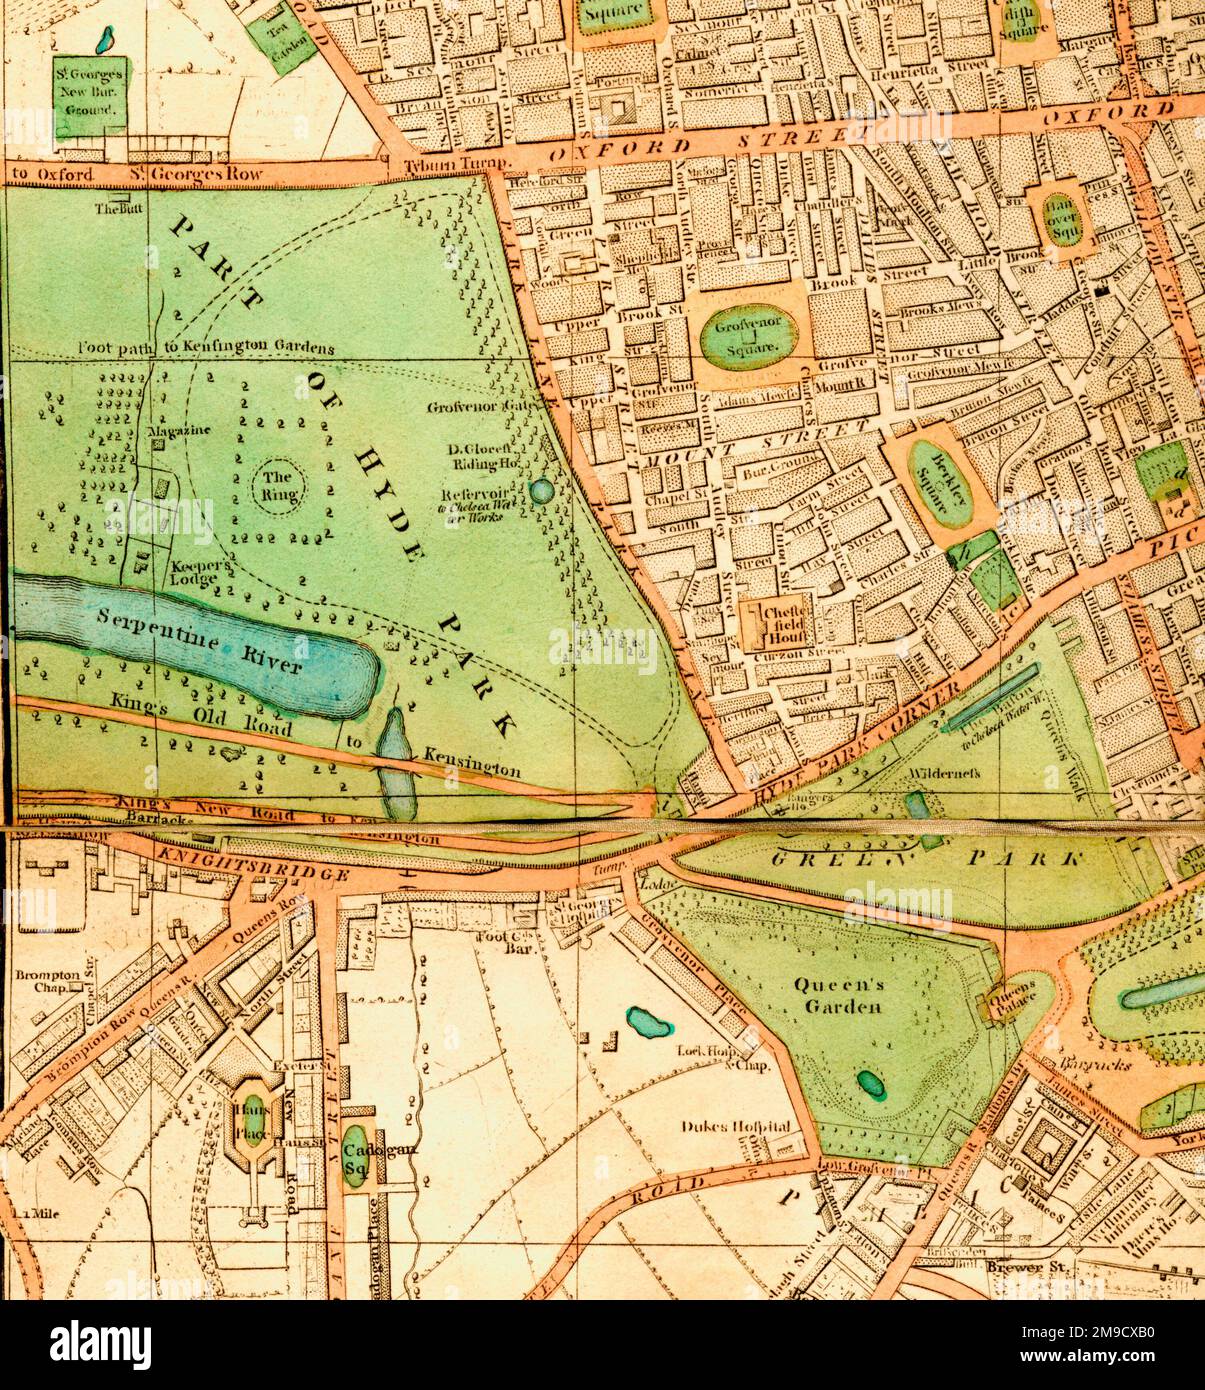 Extract Of London Showing Great Audley Street, Hyde Park and Green Park Stock Photo